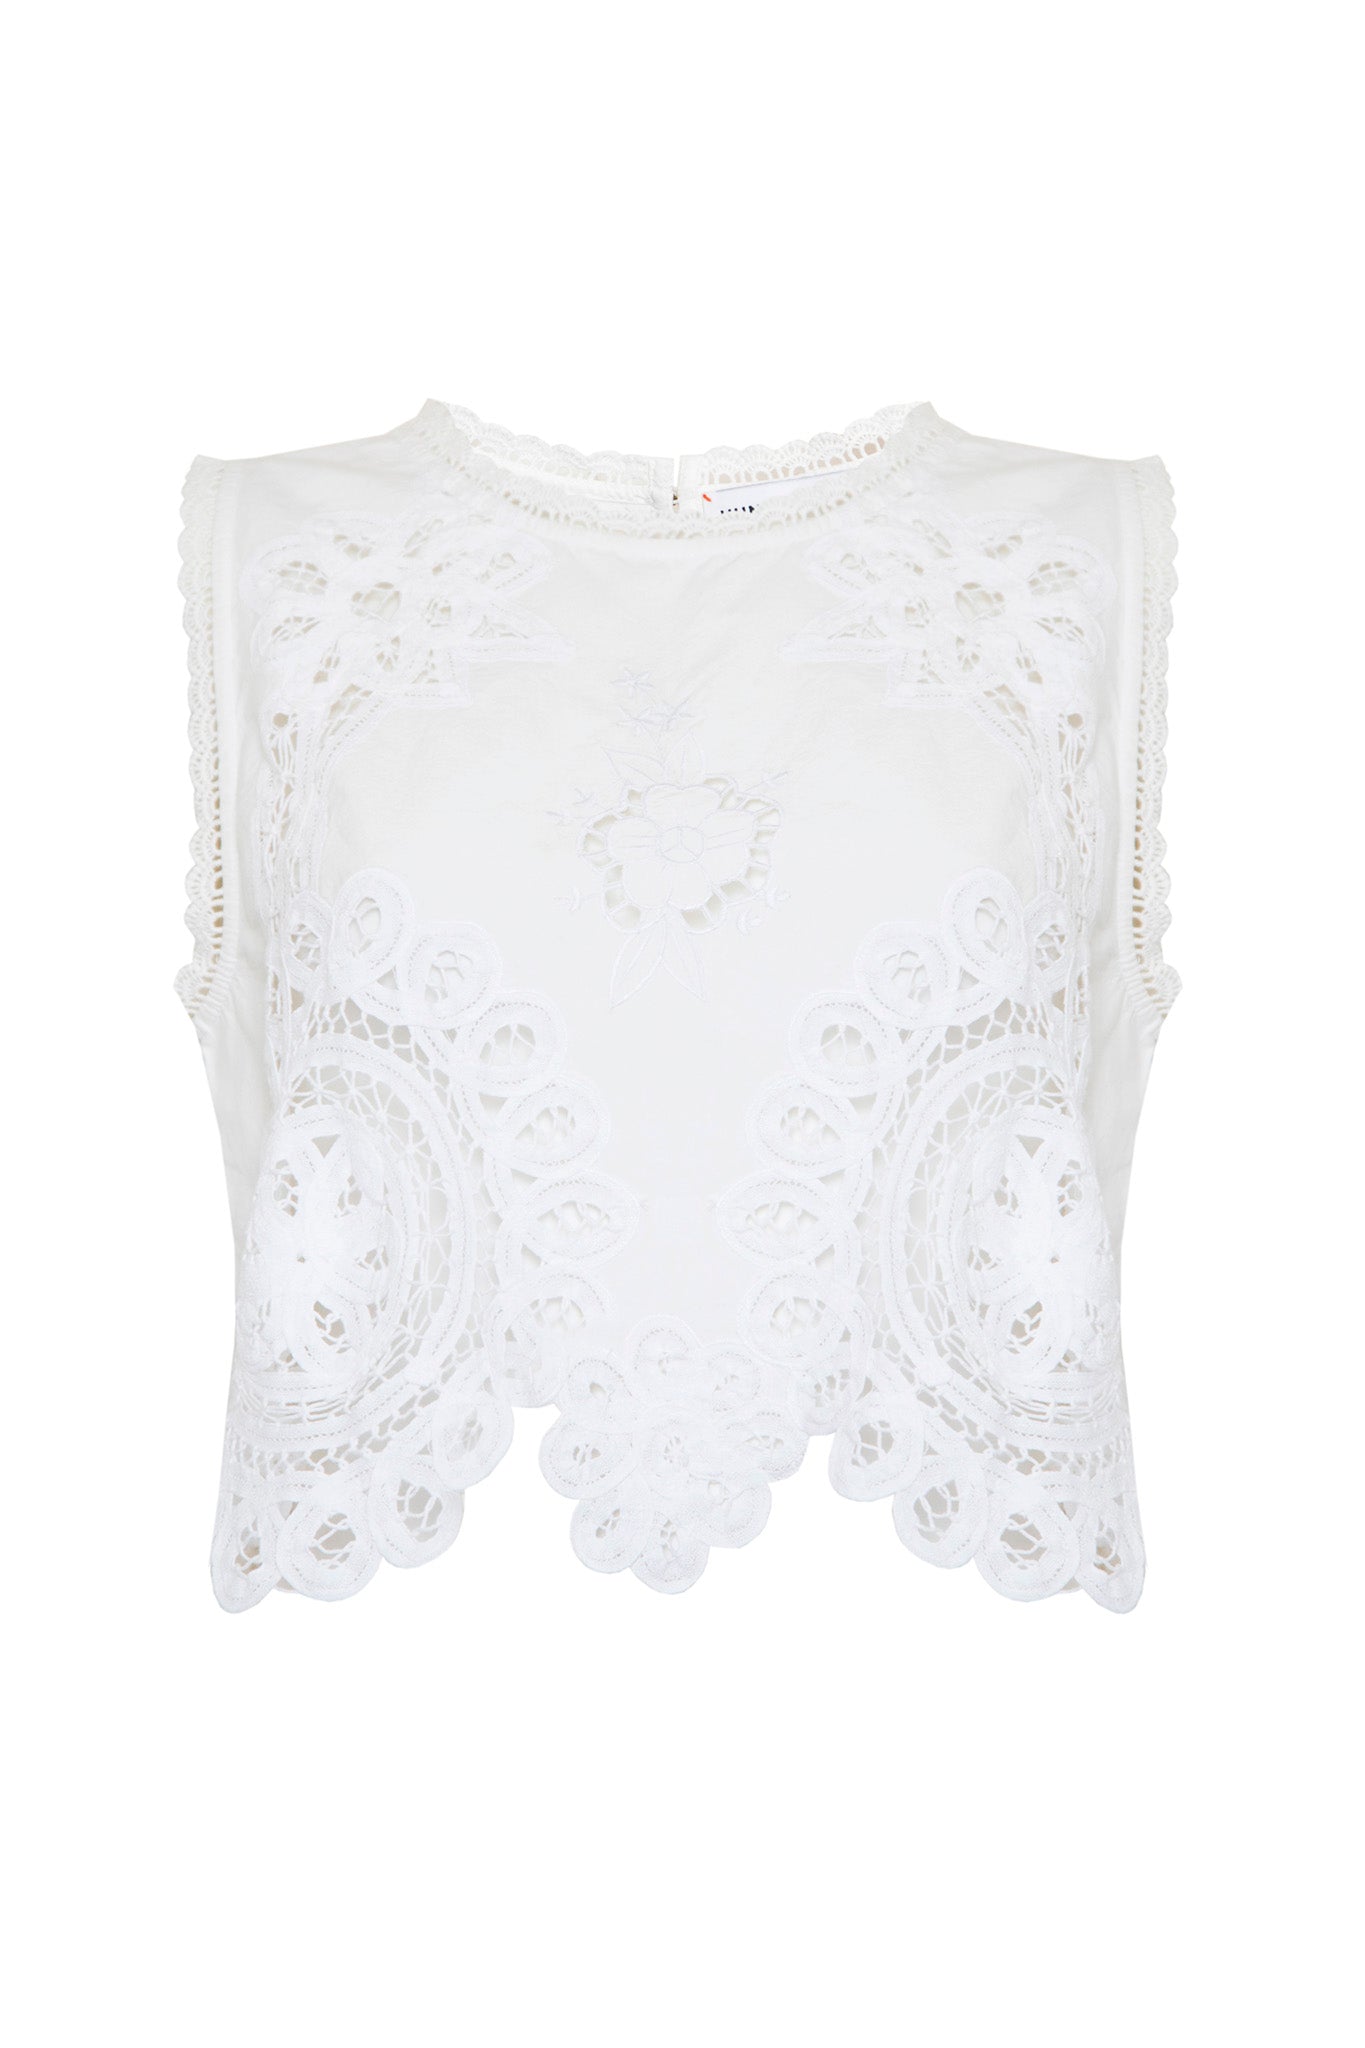 Francesca Top in Vintage Lace by HUNTER BELL